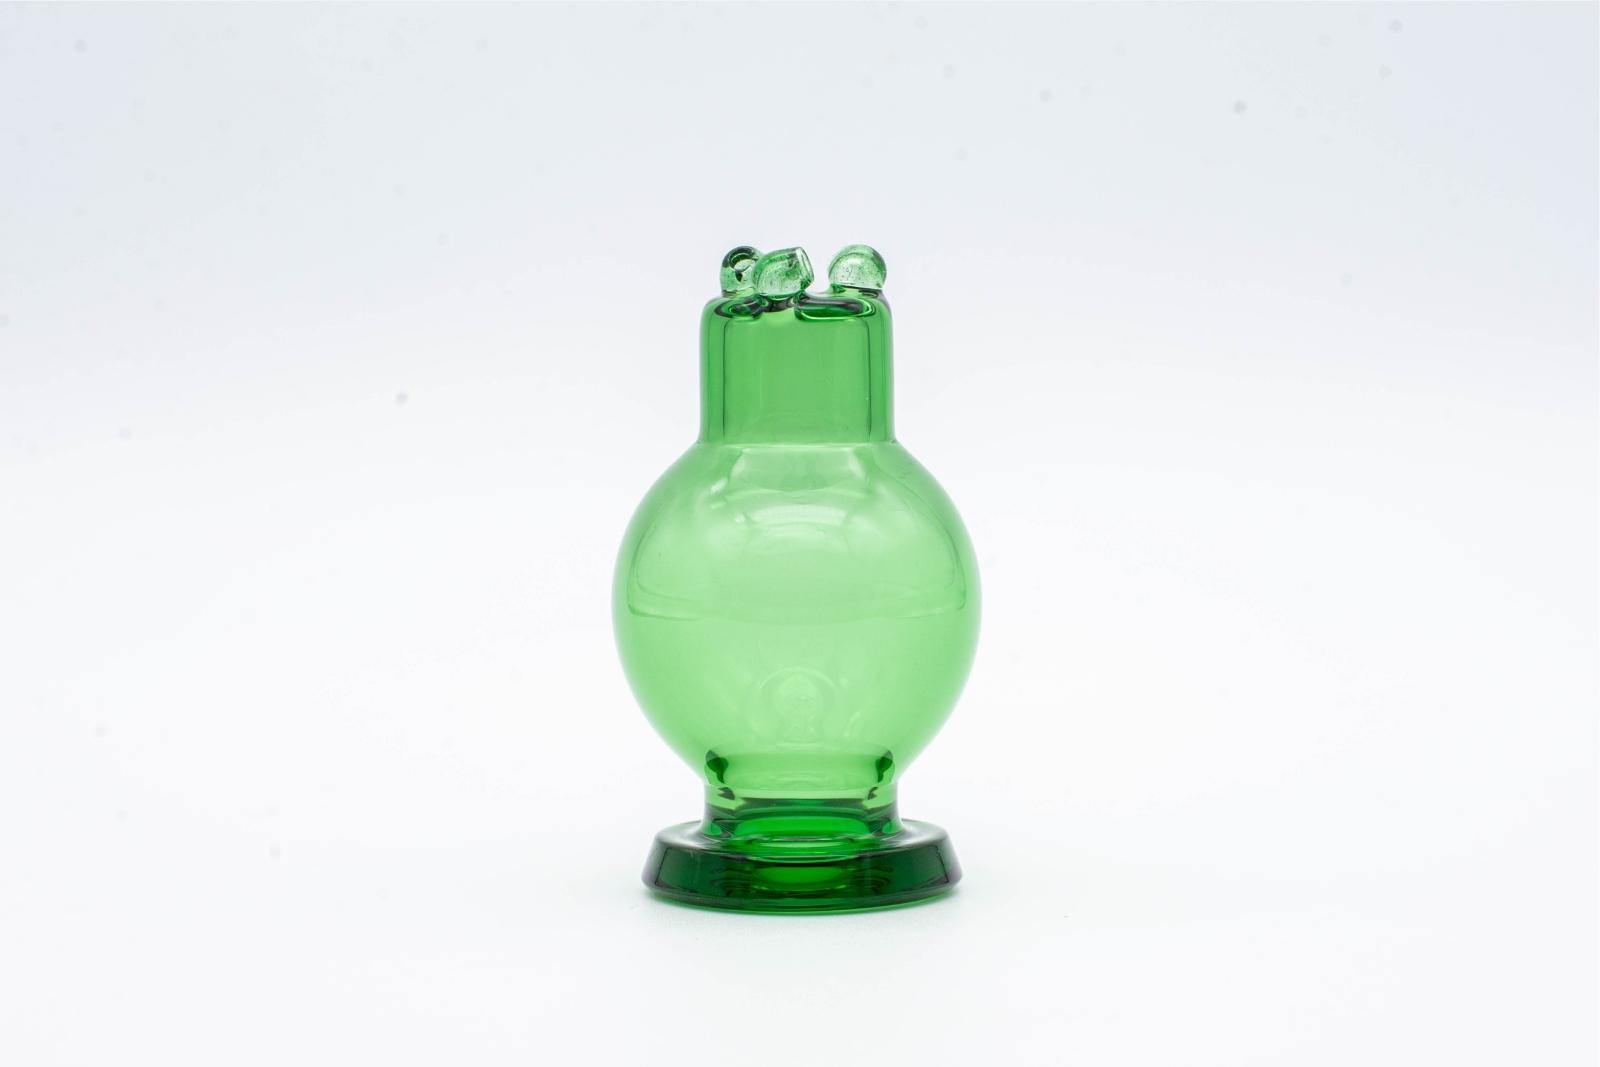 A clear green spinner bubble cap made by BorOregon, on a white background